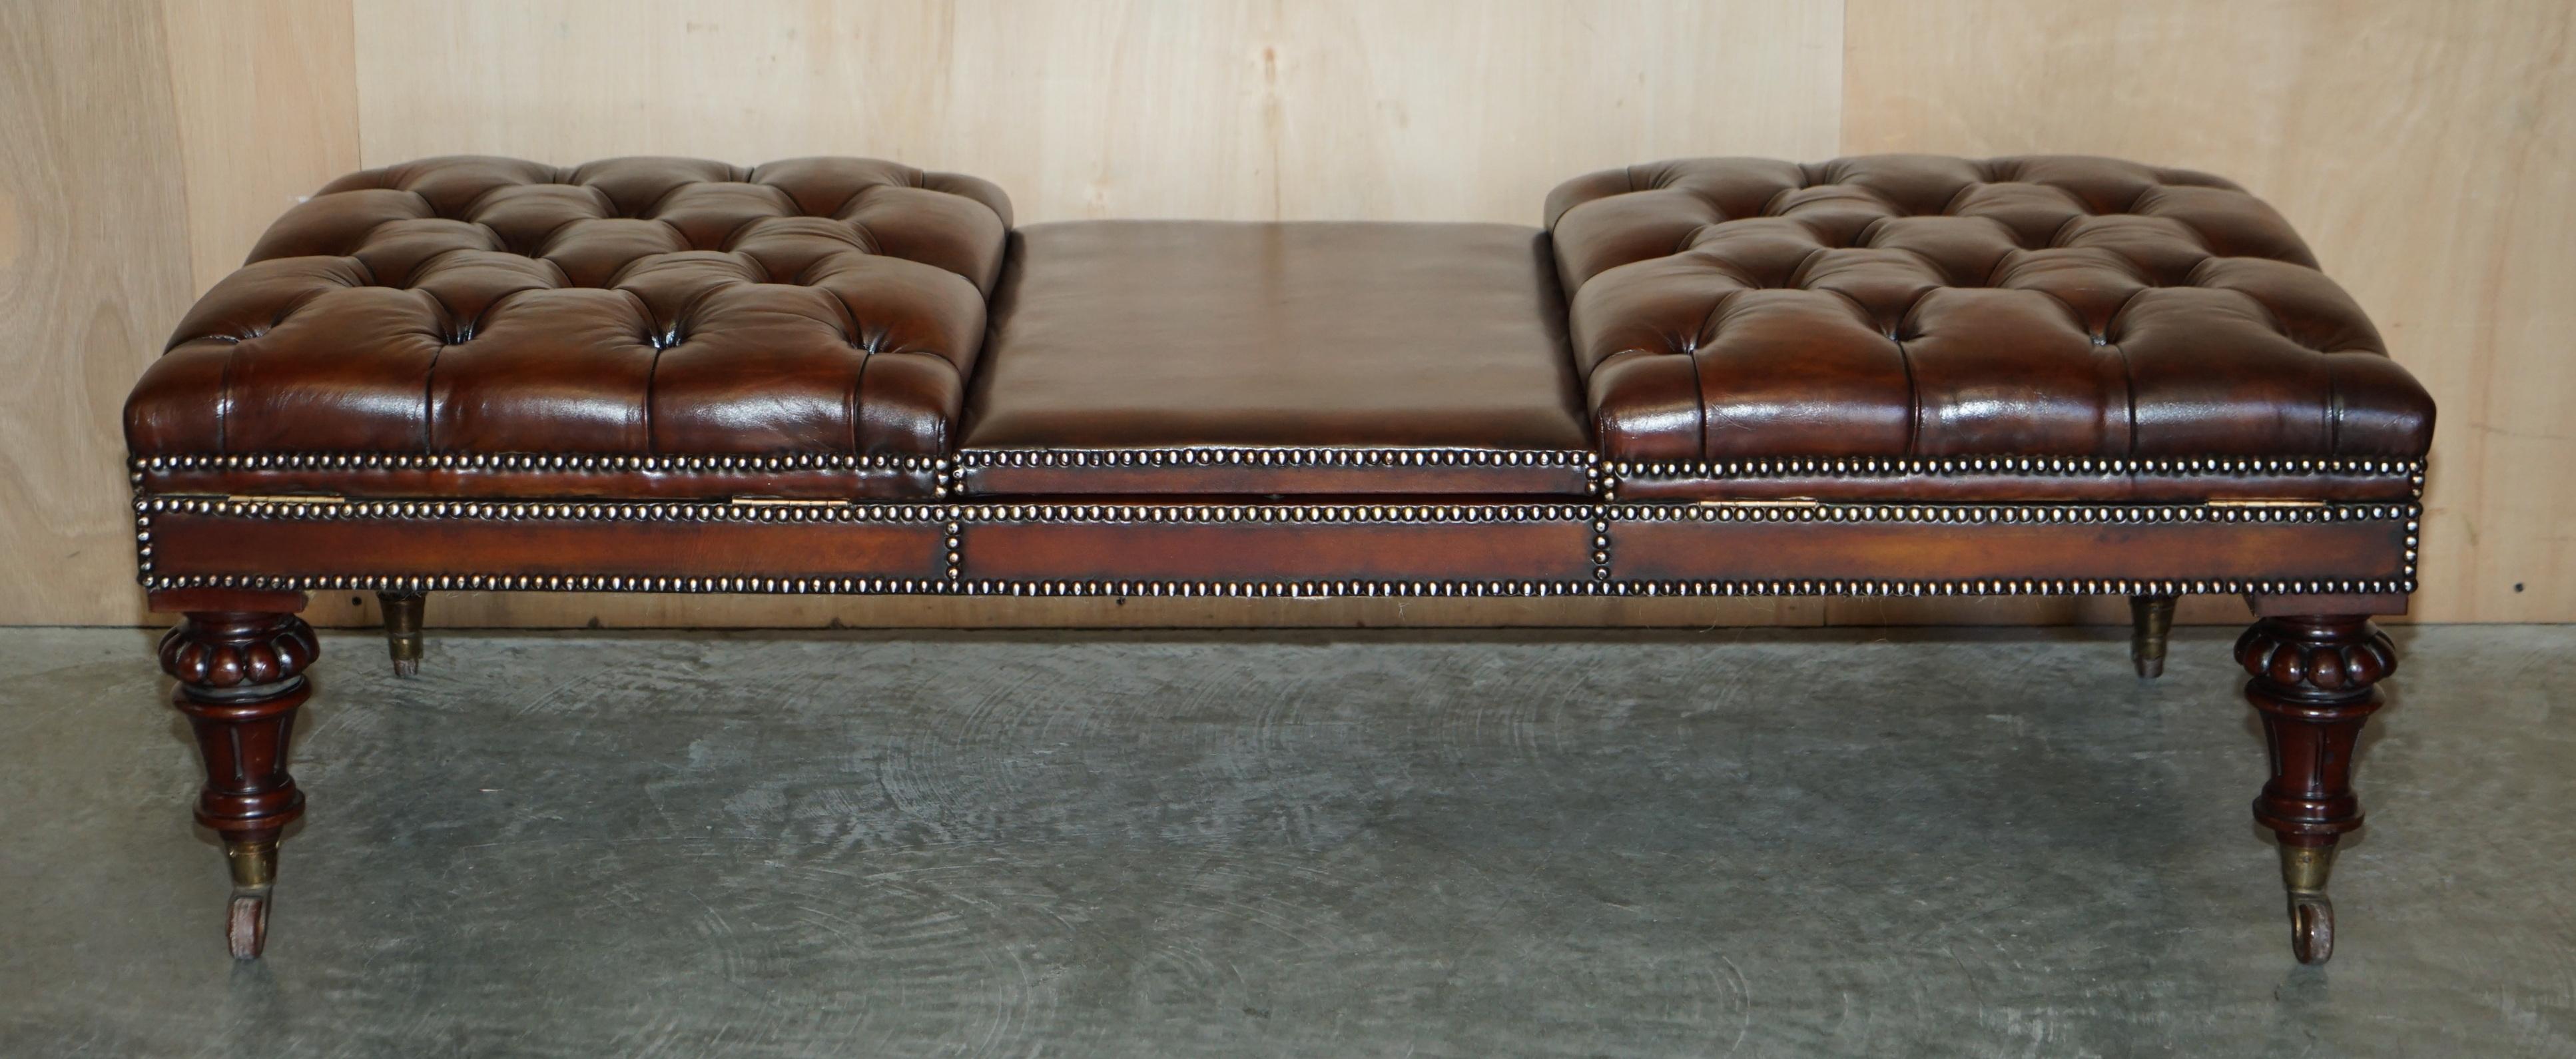 RESTORED WILLIAM IV CIRCA 1830 CHESTERFiELD BROWN LEATHER OTTOMAN FOOTSTOOL 9